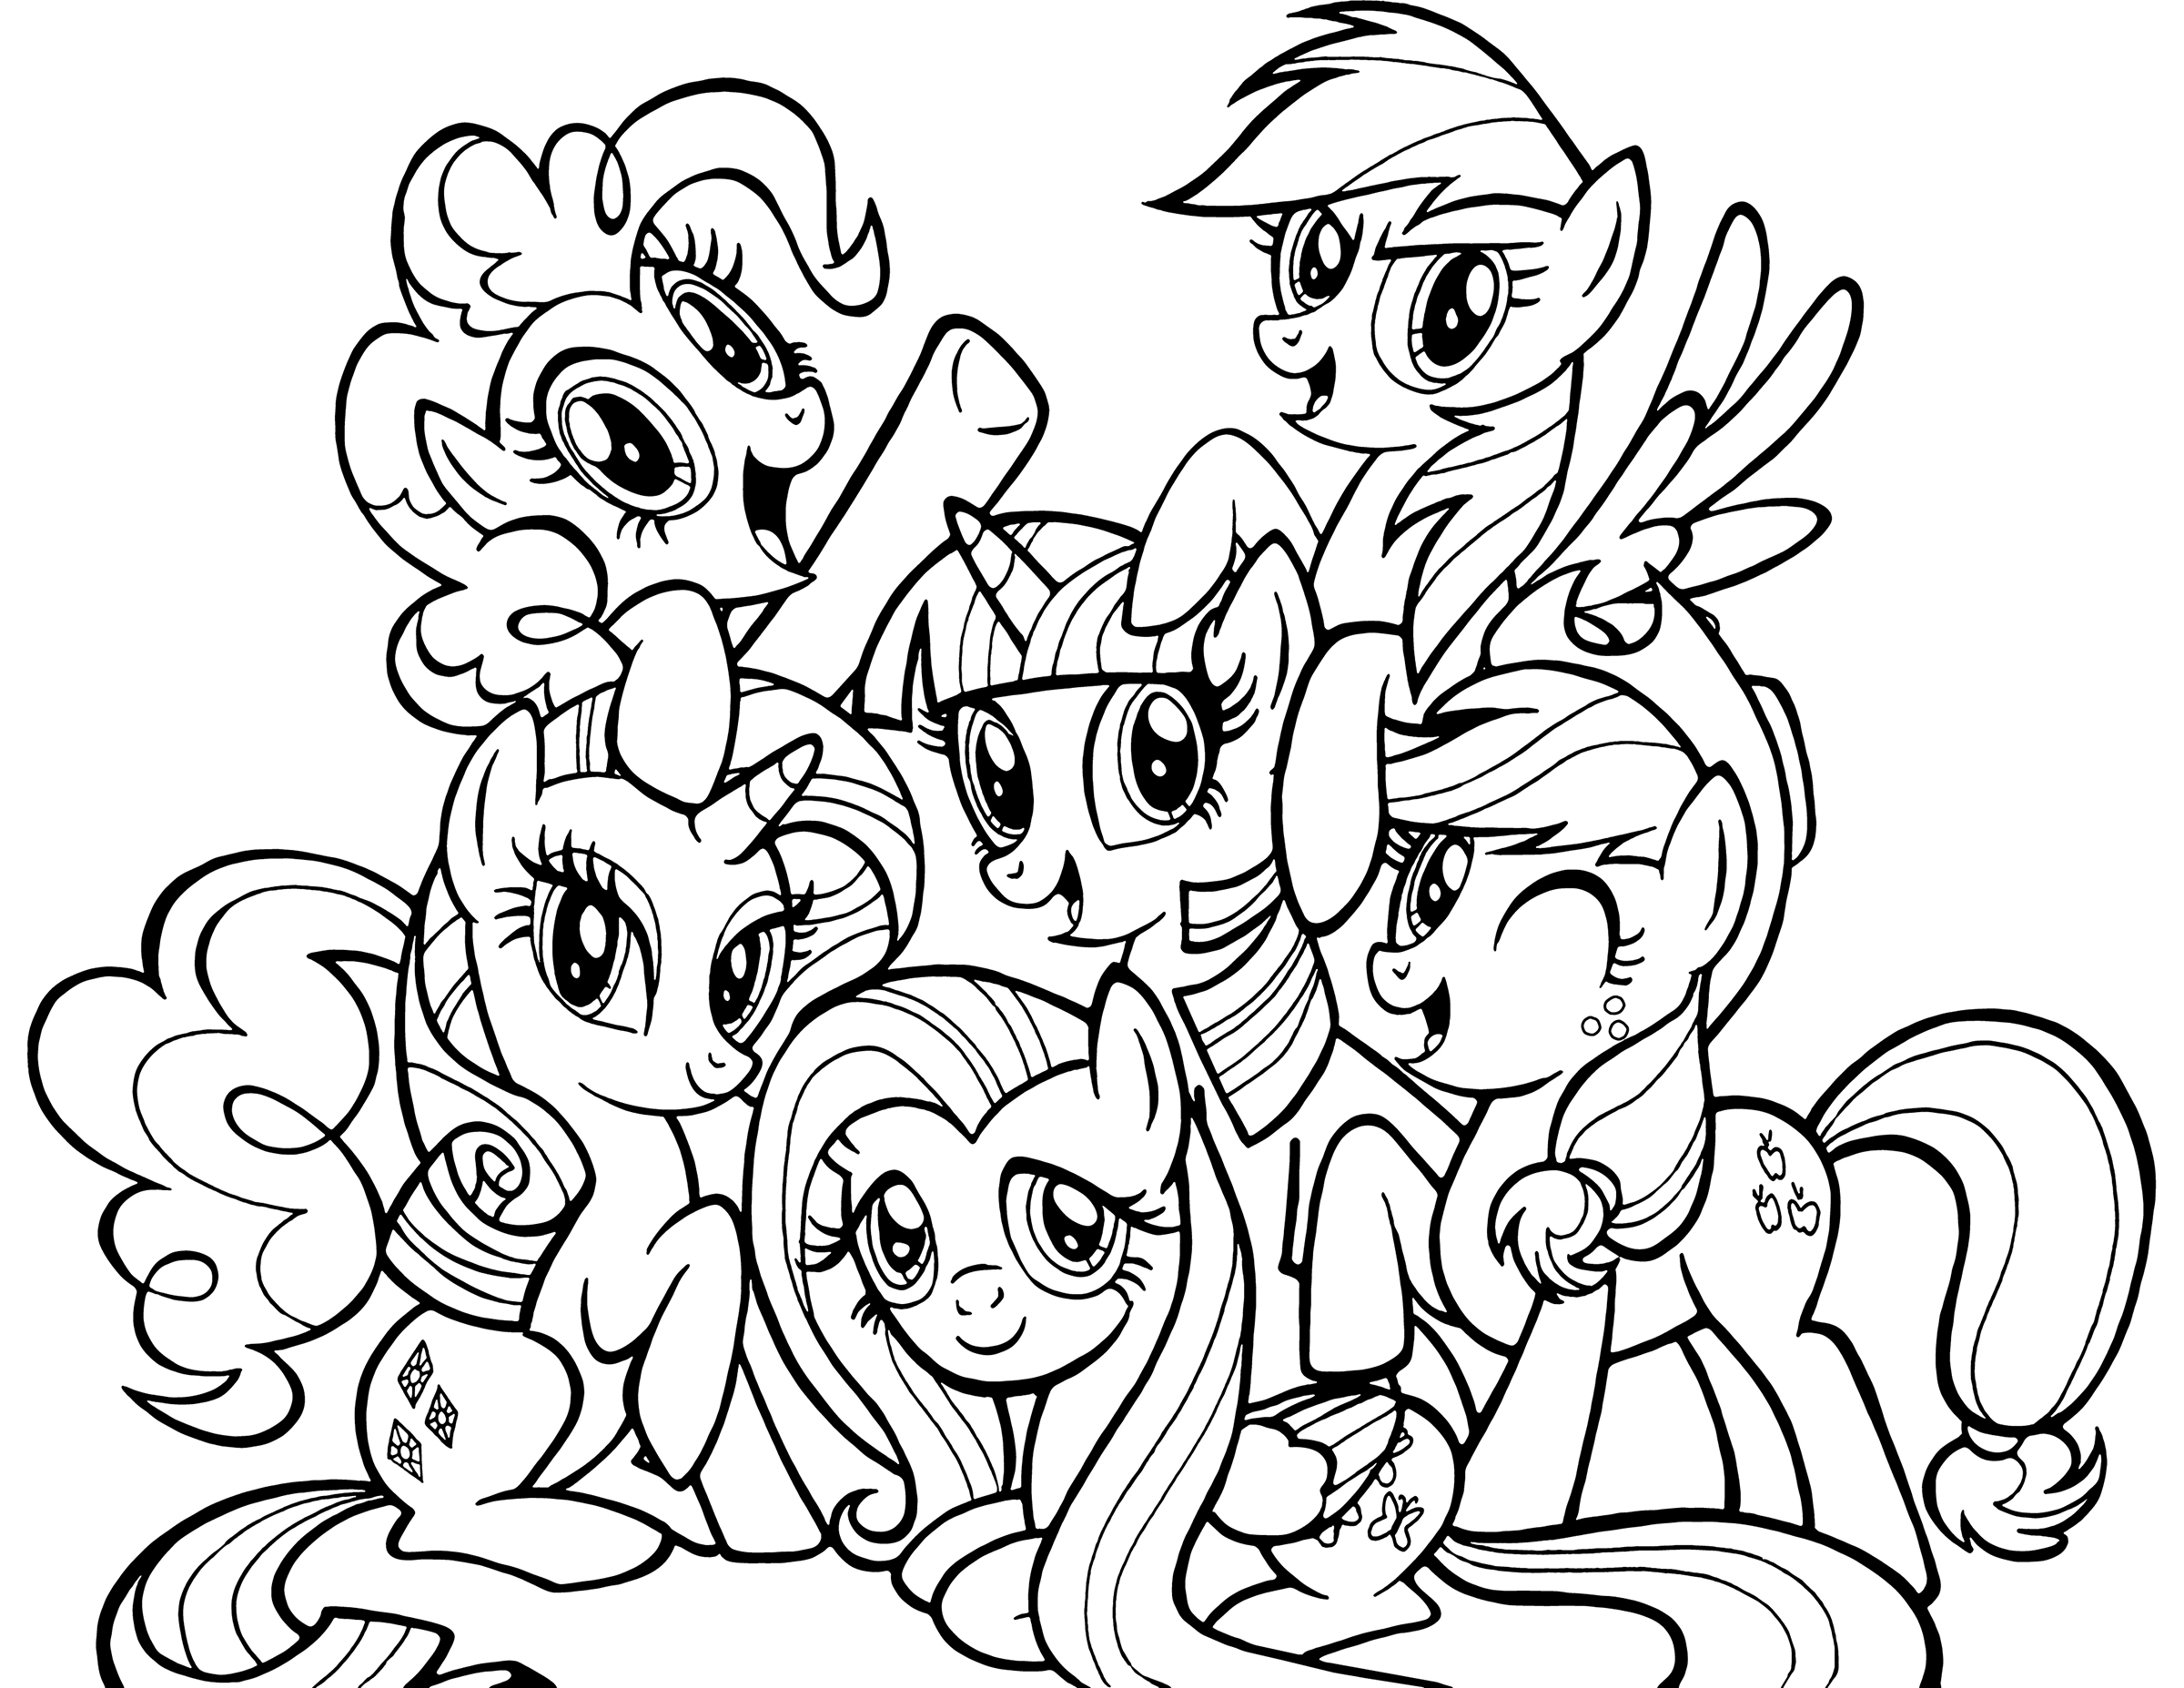 Ponies from Ponyville coloring pages free printable pictures of Ponyville